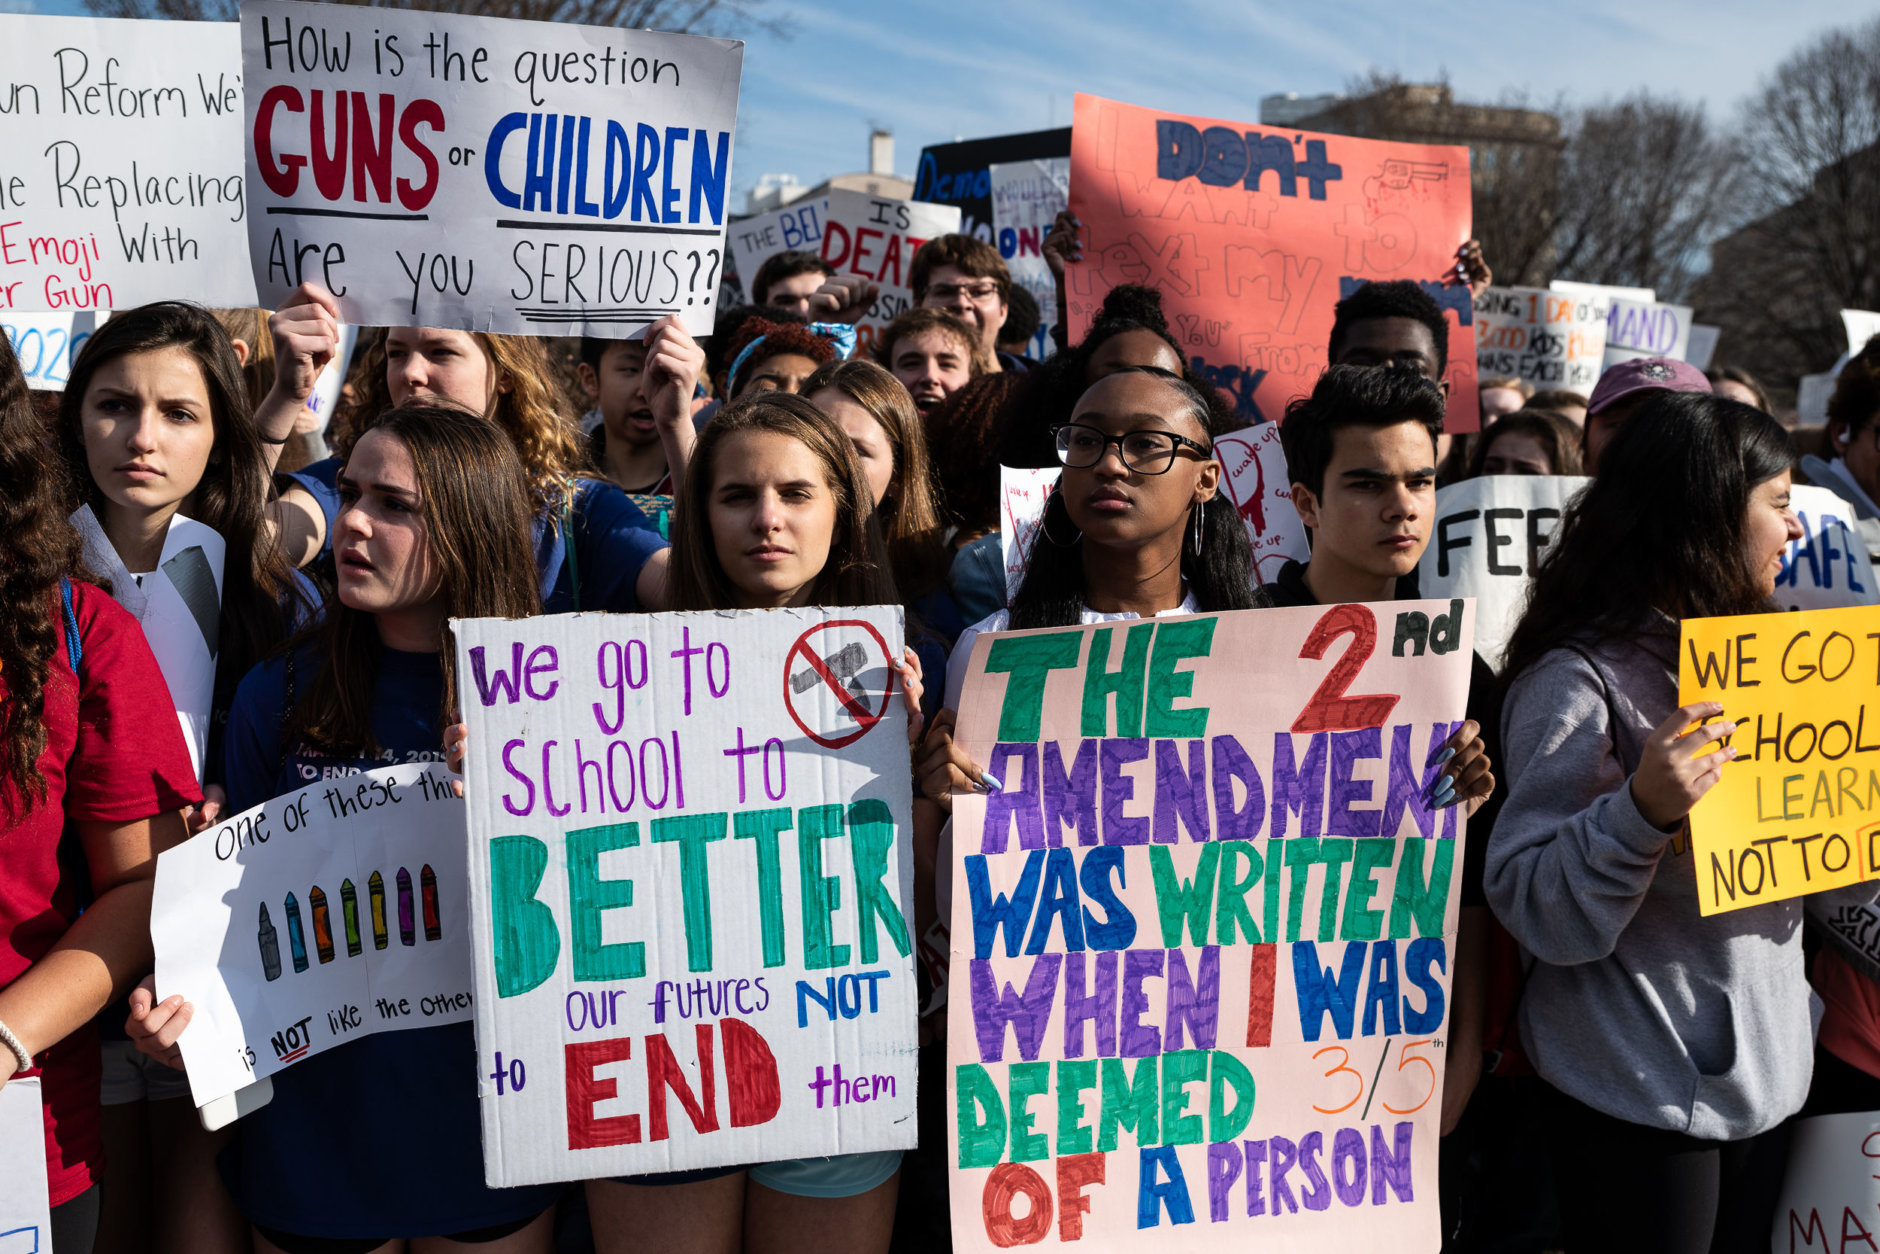 The second iteration of MoCo Students for Change's walkout drew hundreds to the White House before a march to the Capitol, pressuring Congress to pass comprehensive gun control legislation. (WTOP/Alejandro Alvarez)